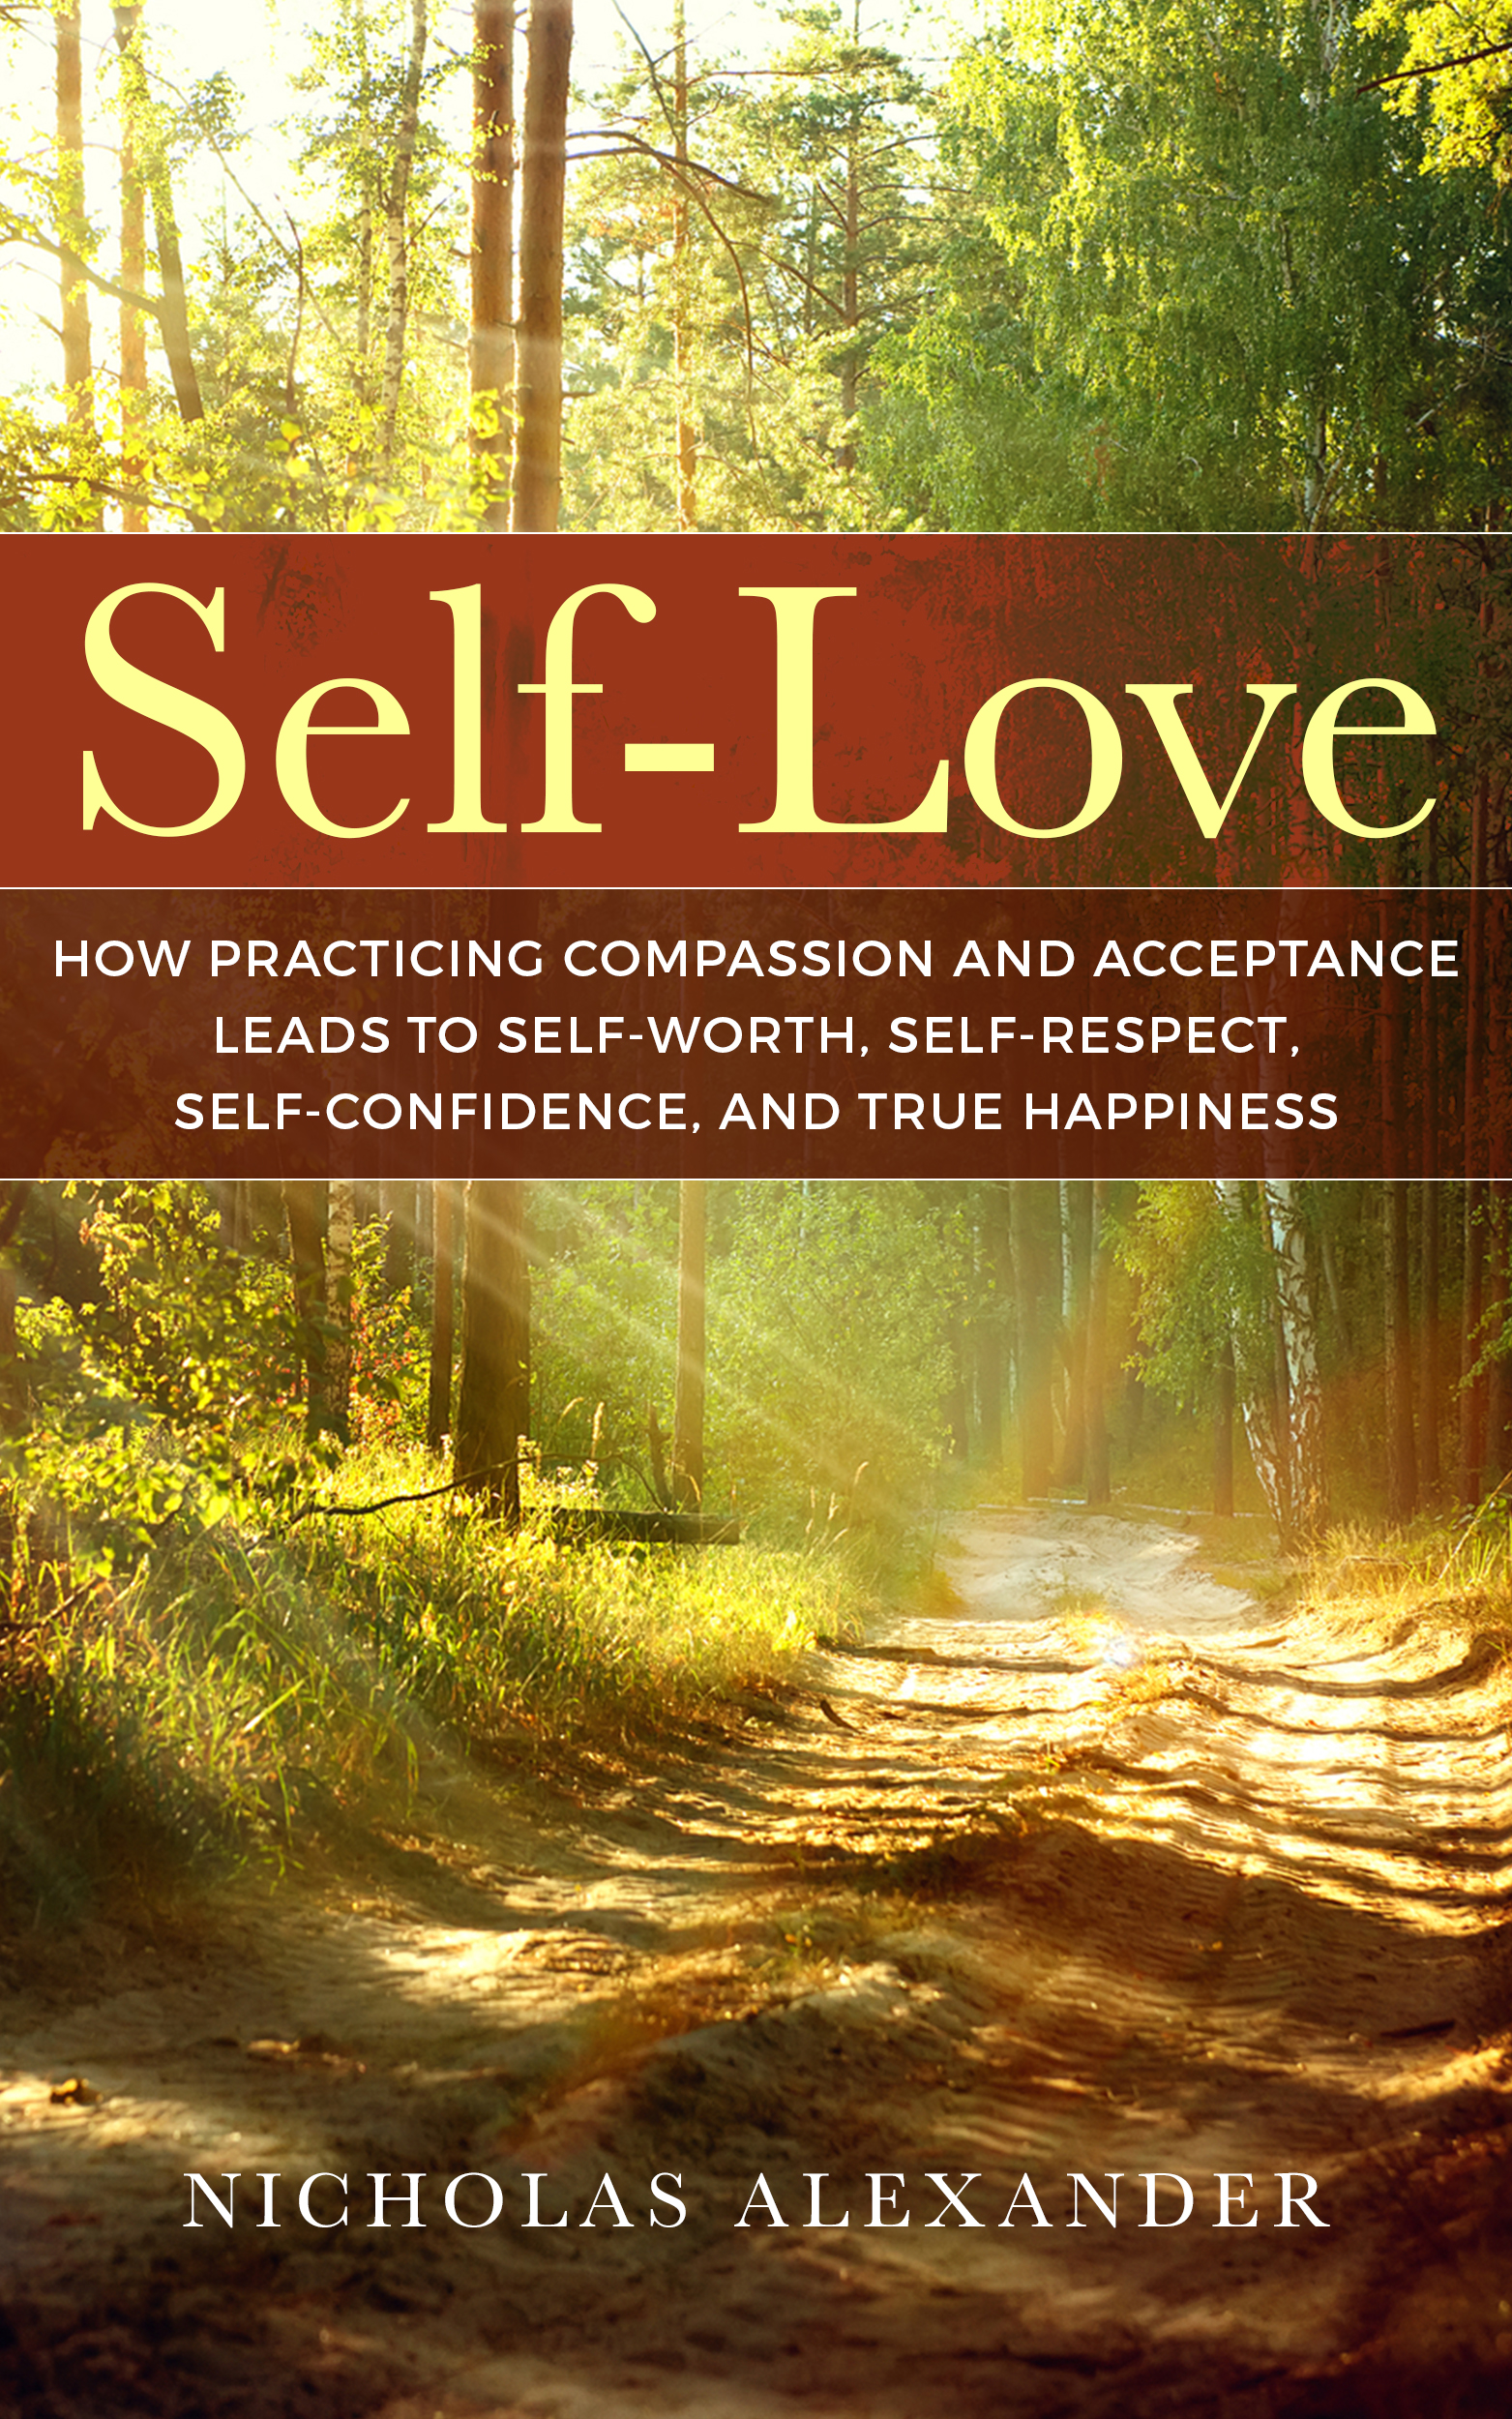 FREE: Self-Love: How Practicing Compassion And Acceptance Leads To Self-Worth, Self-Respect, Self-Confidence, And True Happiness by Nicholas Alexander